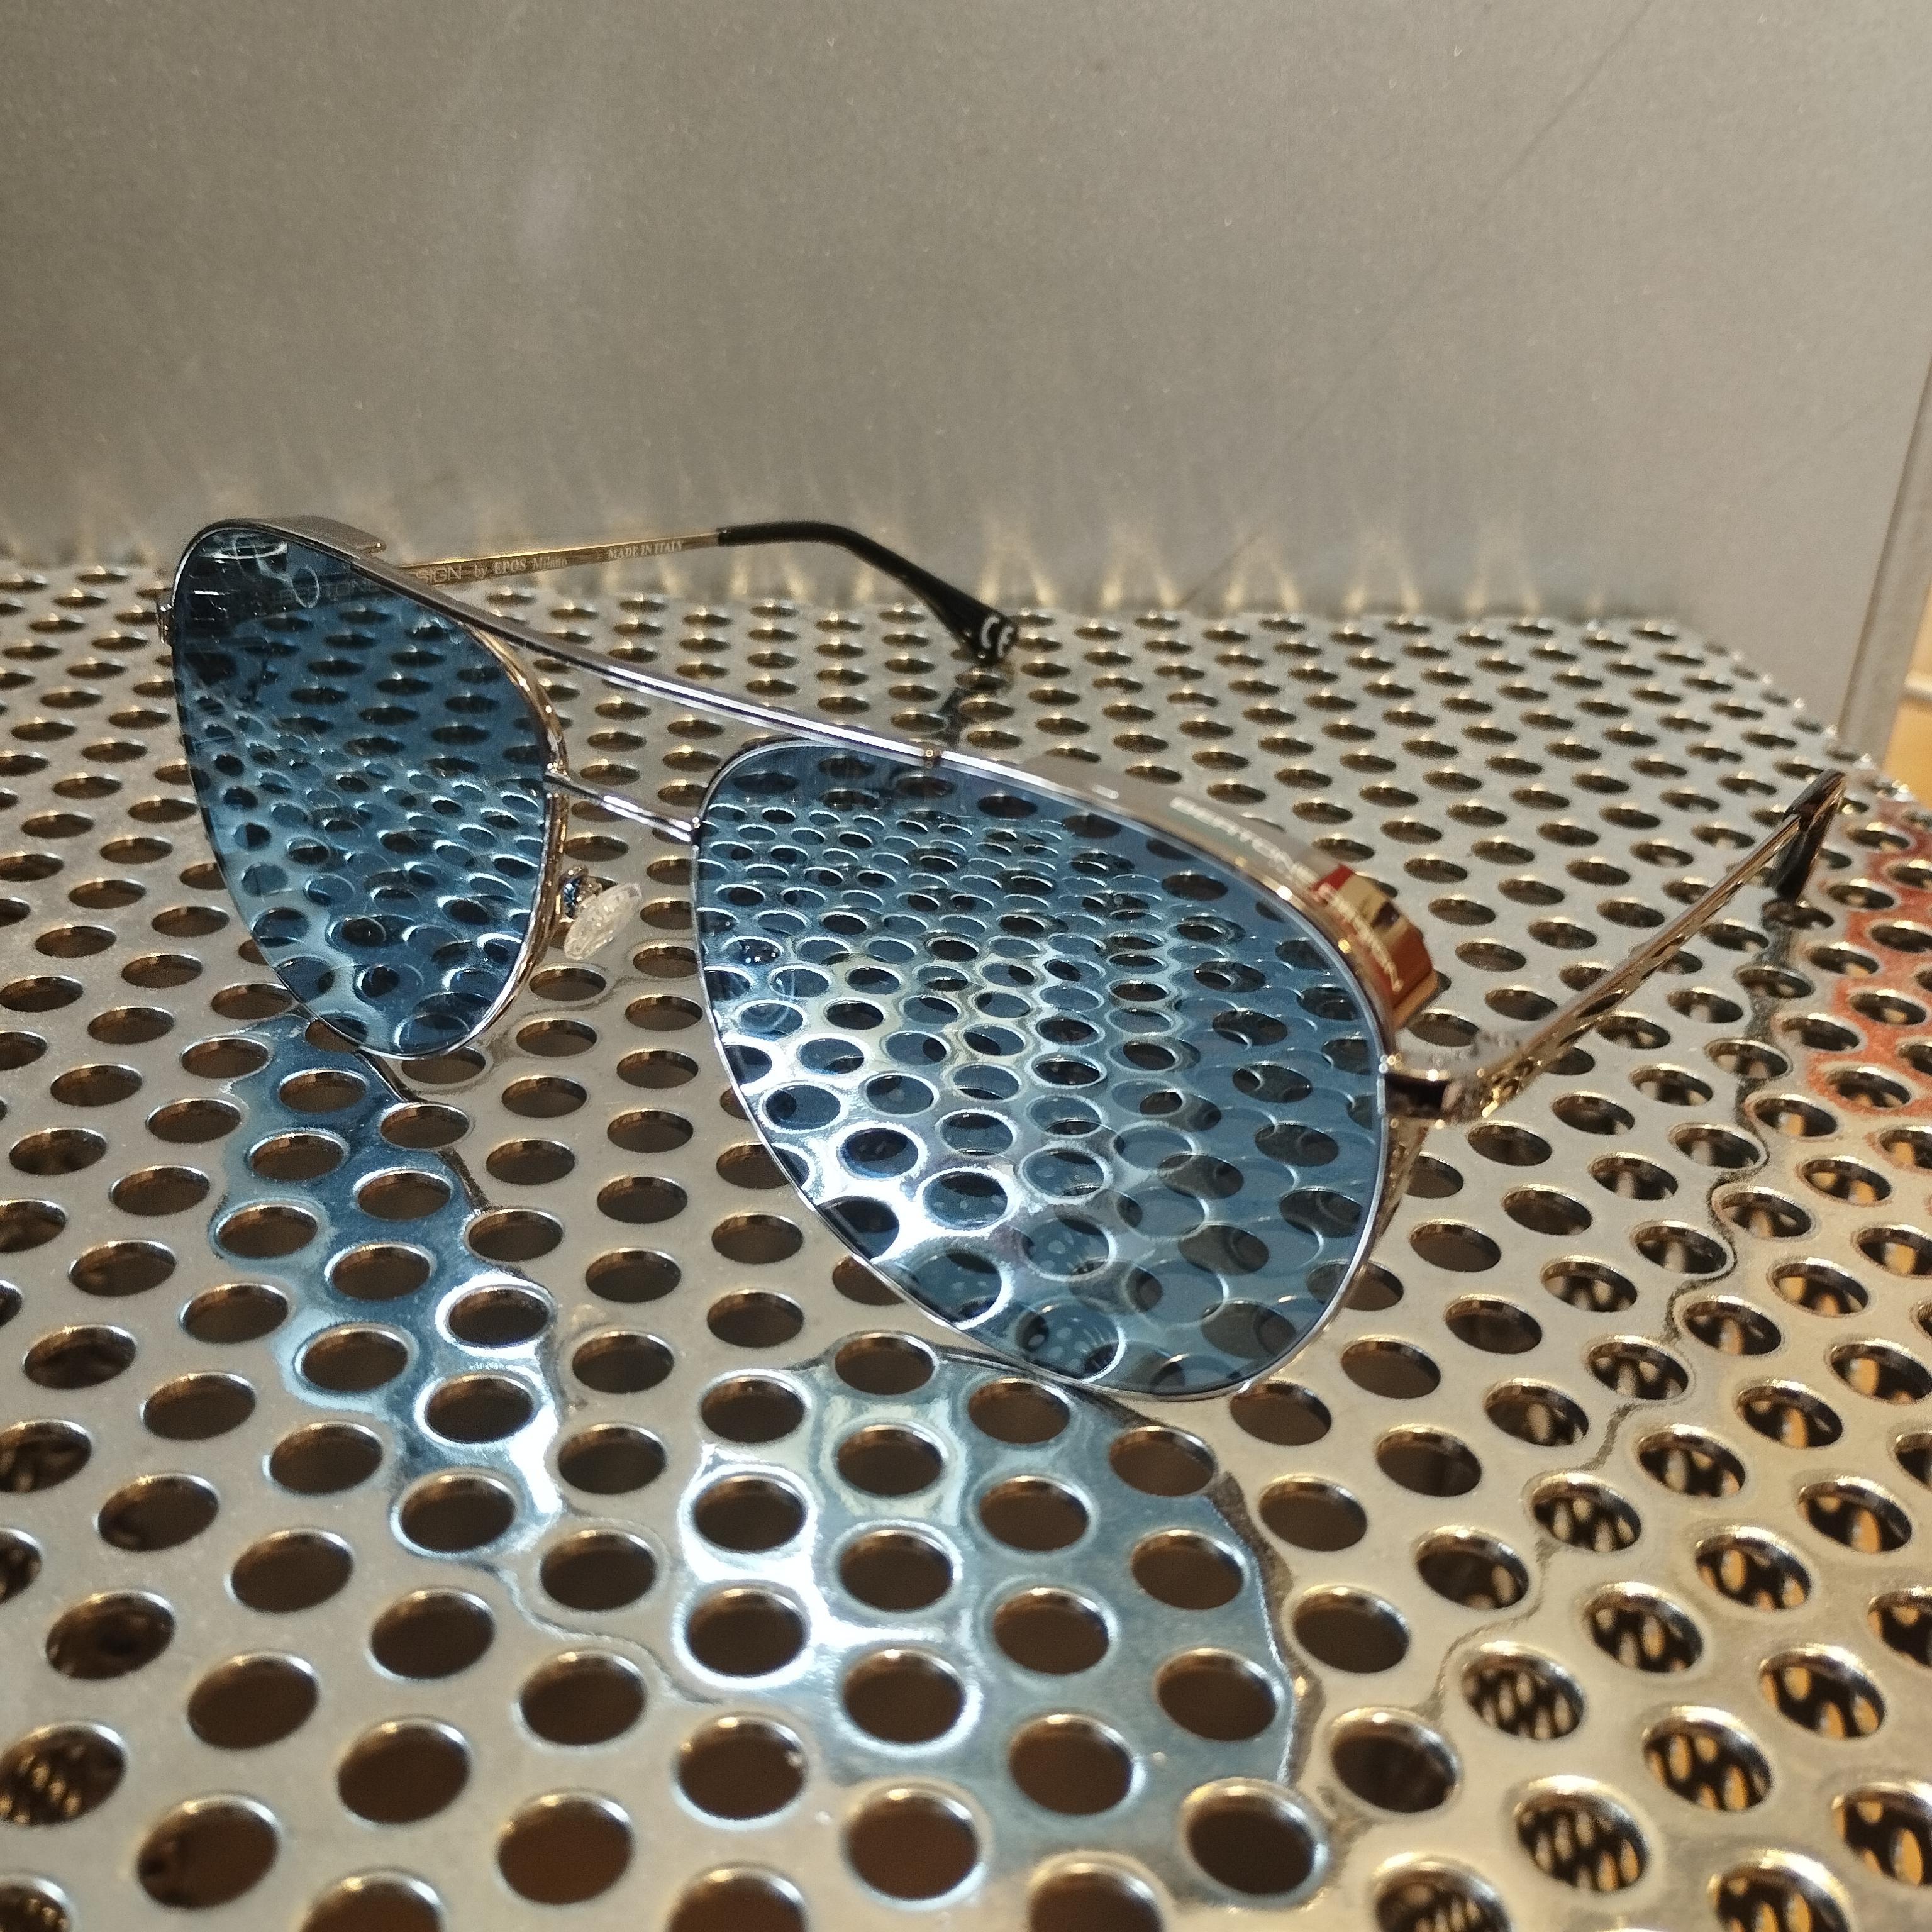 Special and sought after piece, artisanally made in Italy
Bertone Design by Epos Milano
Stratos Zero SL
Limited Edition pair of sunglasses owned by same person and very rarely used
Azure lenses
Frame width cm 13 (5,11 inches)
Come with original